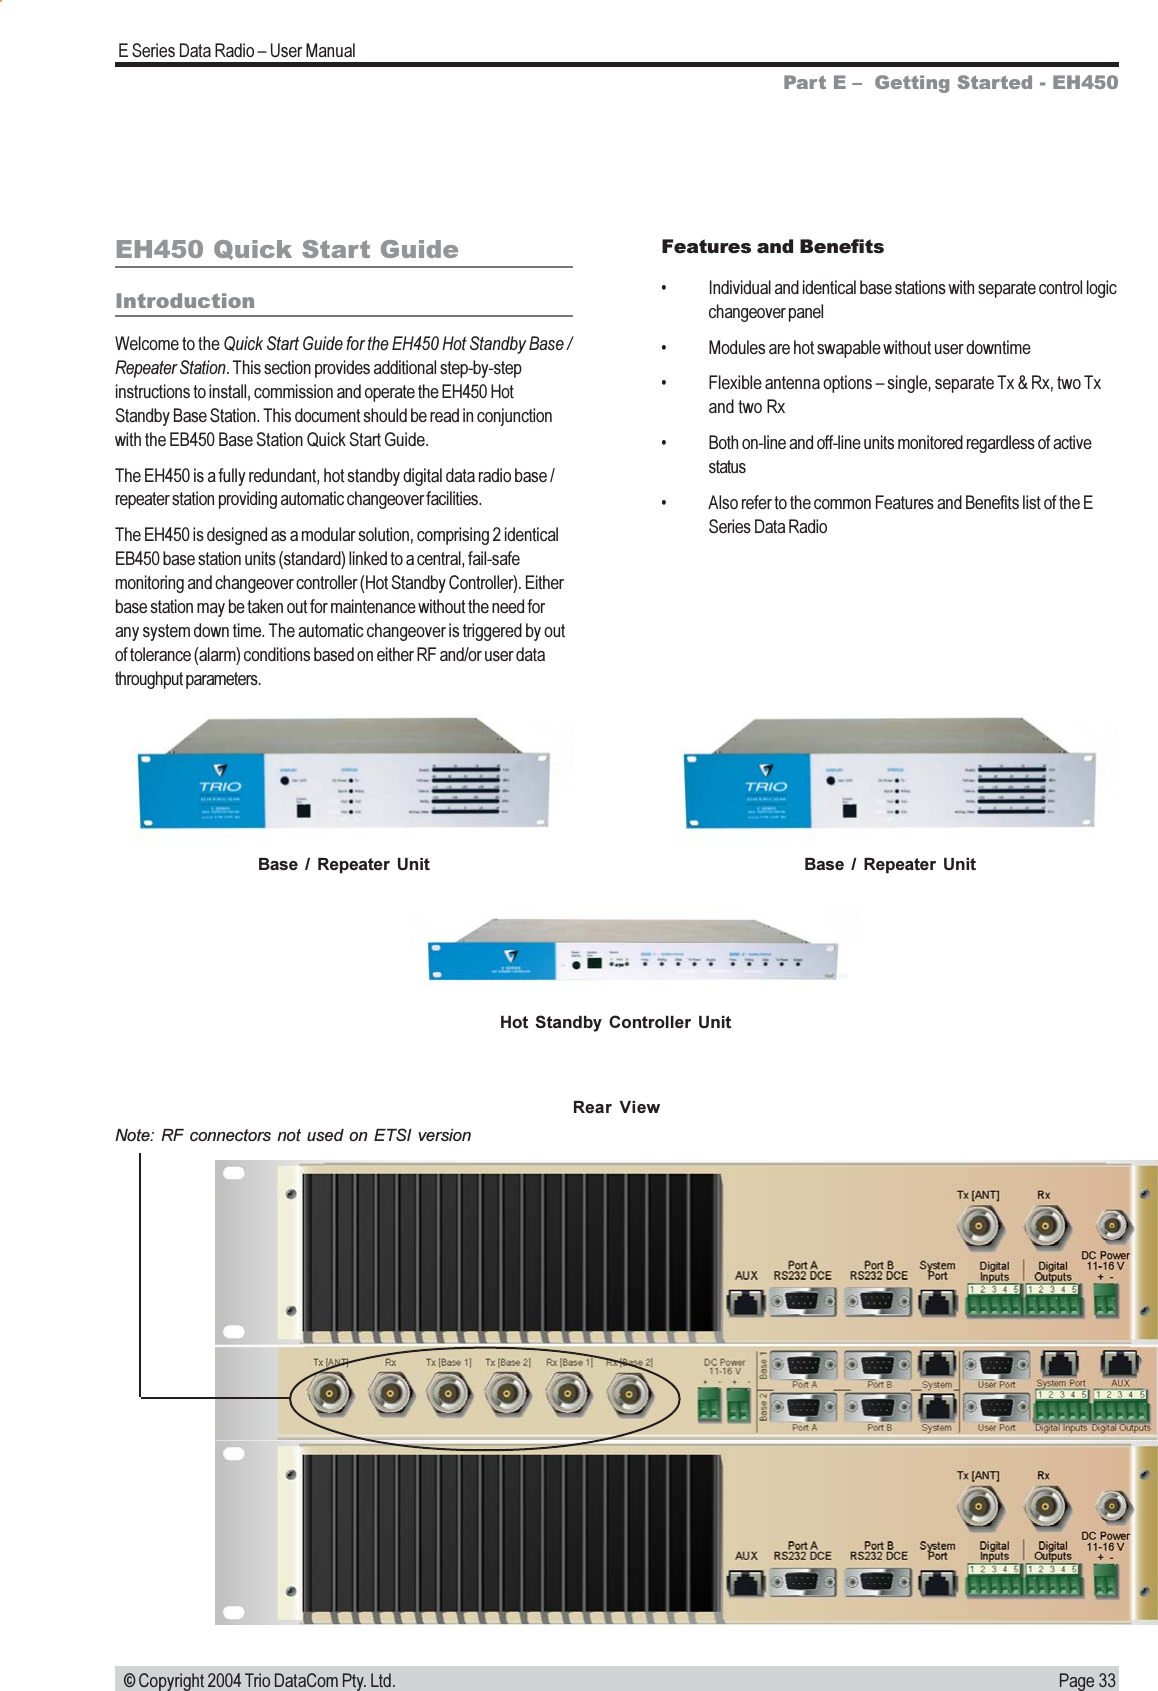 Page 33E Series Data Radio  User Manual © Copyright 2004 Trio DataCom Pty. Ltd.EH450 Quick Start GuideIntroductionWelcome to the Quick Start Guide for the EH450 Hot Standby Base /Repeater Station. This section provides additional step-by-stepinstructions to install, commission and operate the EH450 HotStandby Base Station. This document should be read in conjunctionwith the EB450 Base Station Quick Start Guide.The EH450 is a fully redundant, hot standby digital data radio base /repeater station providing automatic changeover facilities.The EH450 is designed as a modular solution, comprising 2 identicalEB450 base station units (standard) linked to a central, fail-safemonitoring and changeover controller (Hot Standby Controller). Eitherbase station may be taken out for maintenance without the need forany system down time. The automatic changeover is triggered by outof tolerance (alarm) conditions based on either RF and/or user datathroughput parameters.Part E   Getting Started - EH450Features and Benefits Individual and identical base stations with separate control logicchangeover panel Modules are hot swapable without user downtime Flexible antenna options  single, separate Tx &amp; Rx, two Txand two Rx Both on-line and off-line units monitored regardless of activestatus Also refer to the common Features and Benefits list of the ESeries Data RadioBase  /  Repeater  UnitHot  Standby  Controller  UnitBase  /  Repeater  UnitNote:  RF  connectors  not used on ETSI versionRear  View